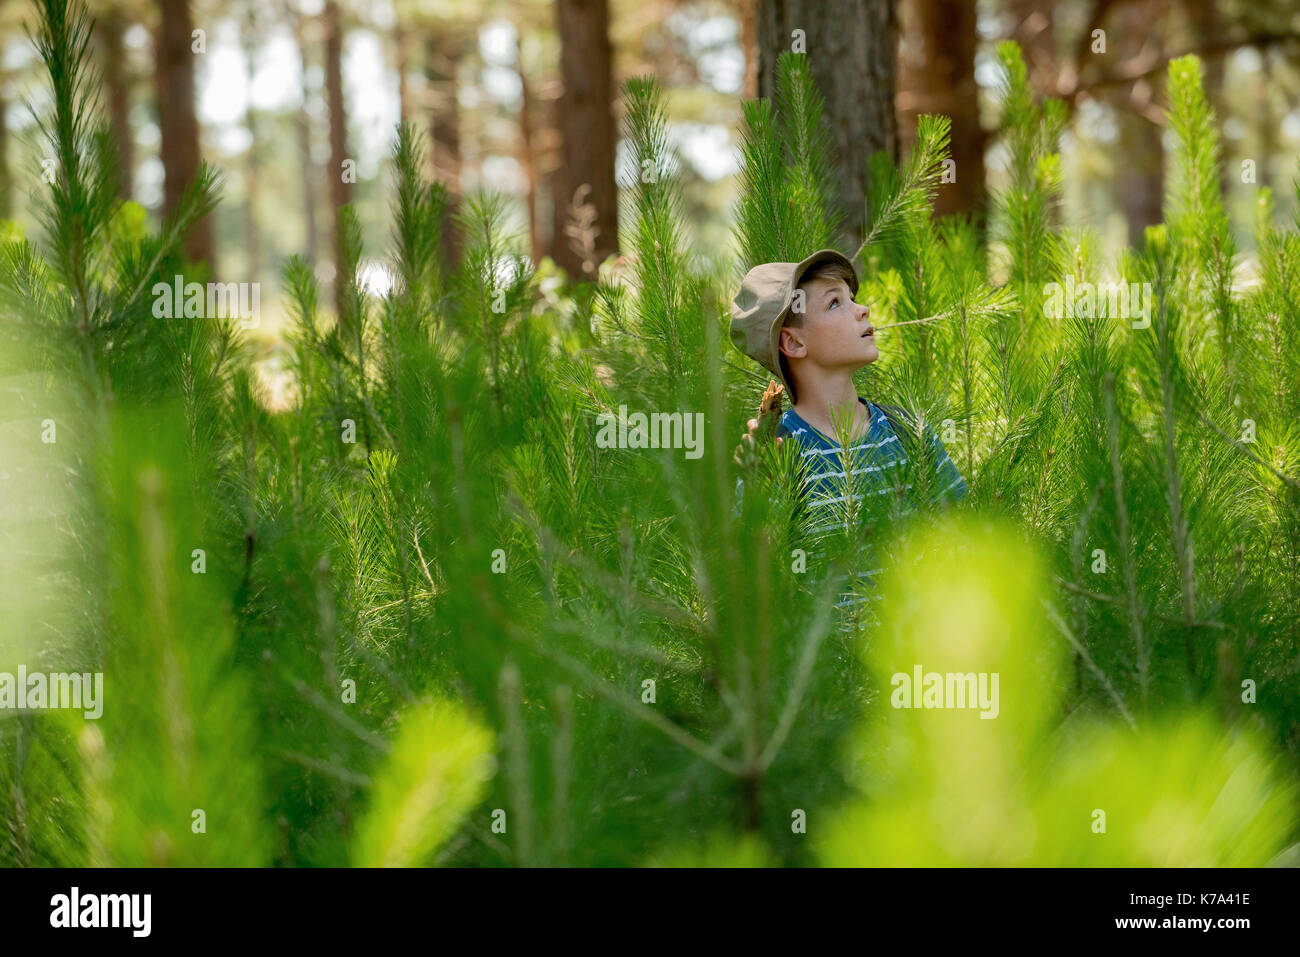 Boy hiking through young pine trees in forest Stock Photo